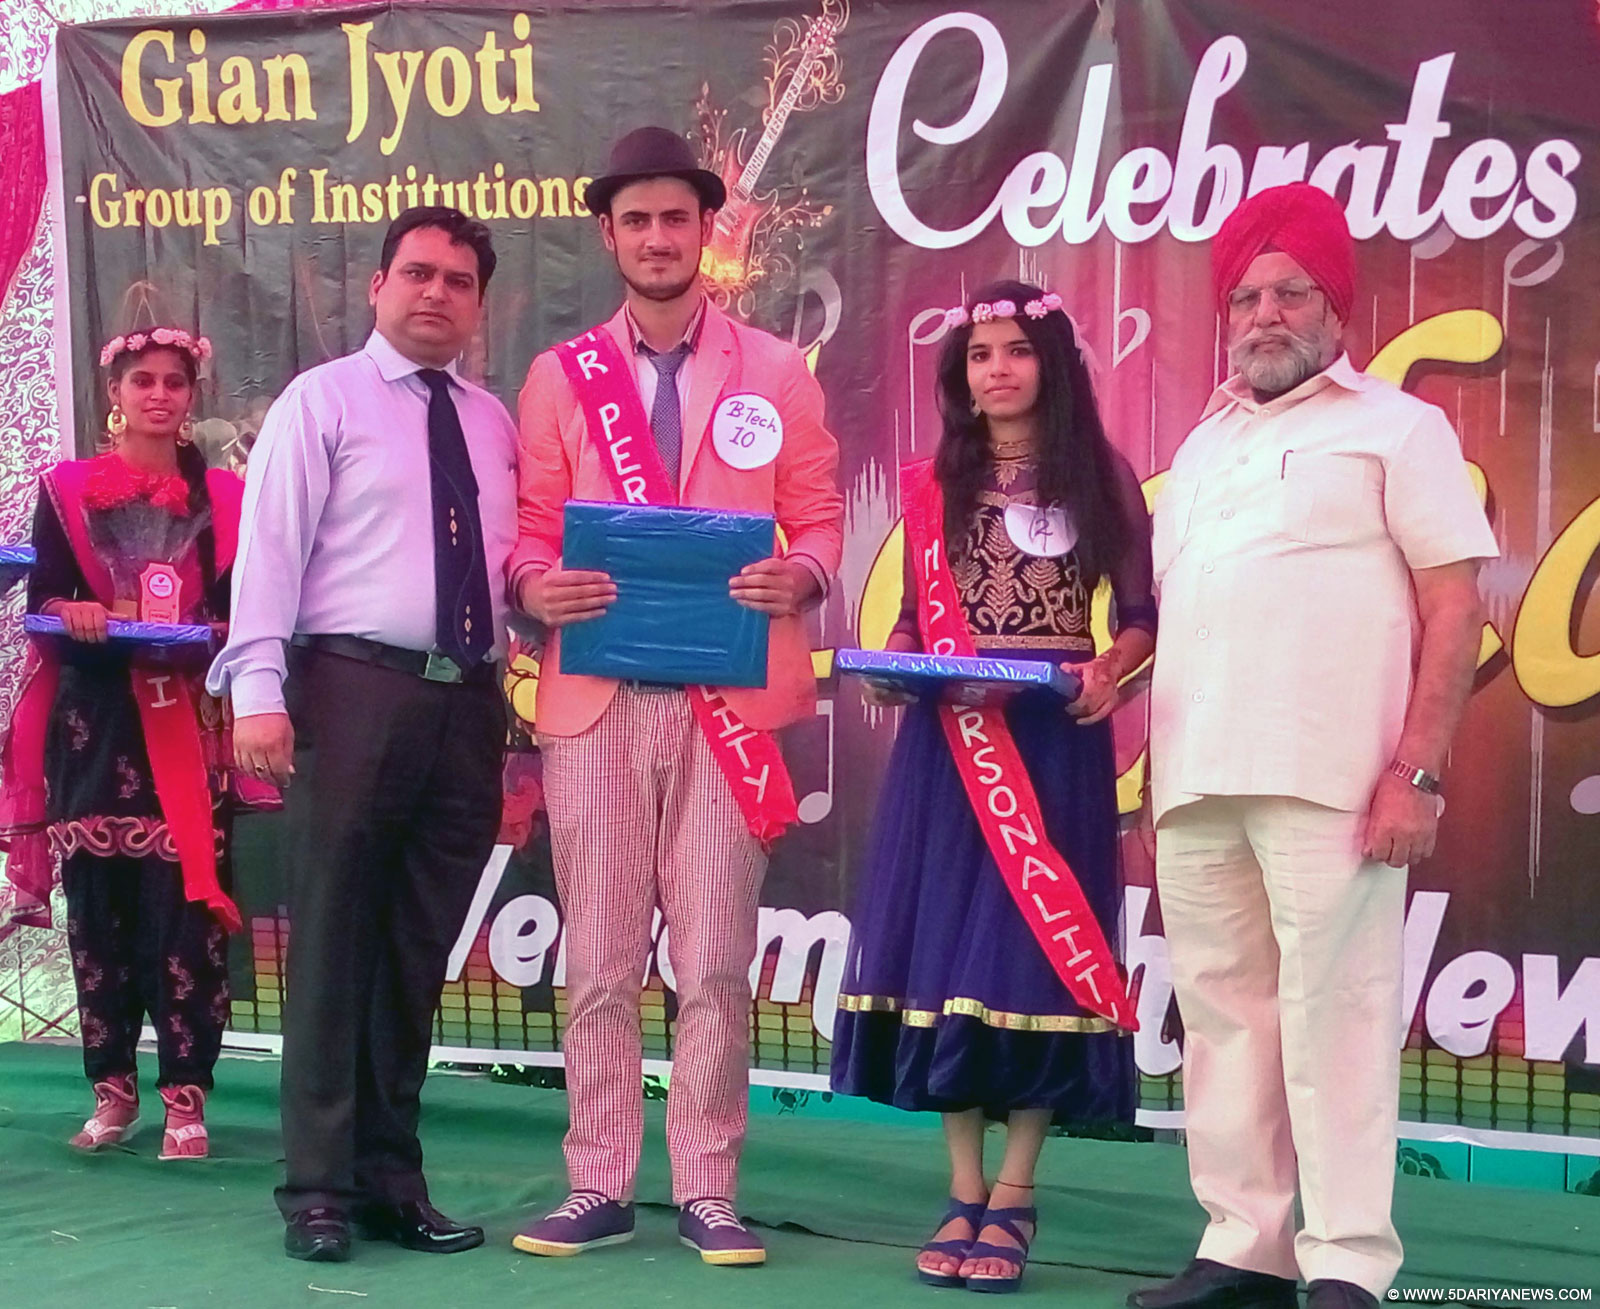 Fresher’s welcome at Gian Jyoti group of Institutions